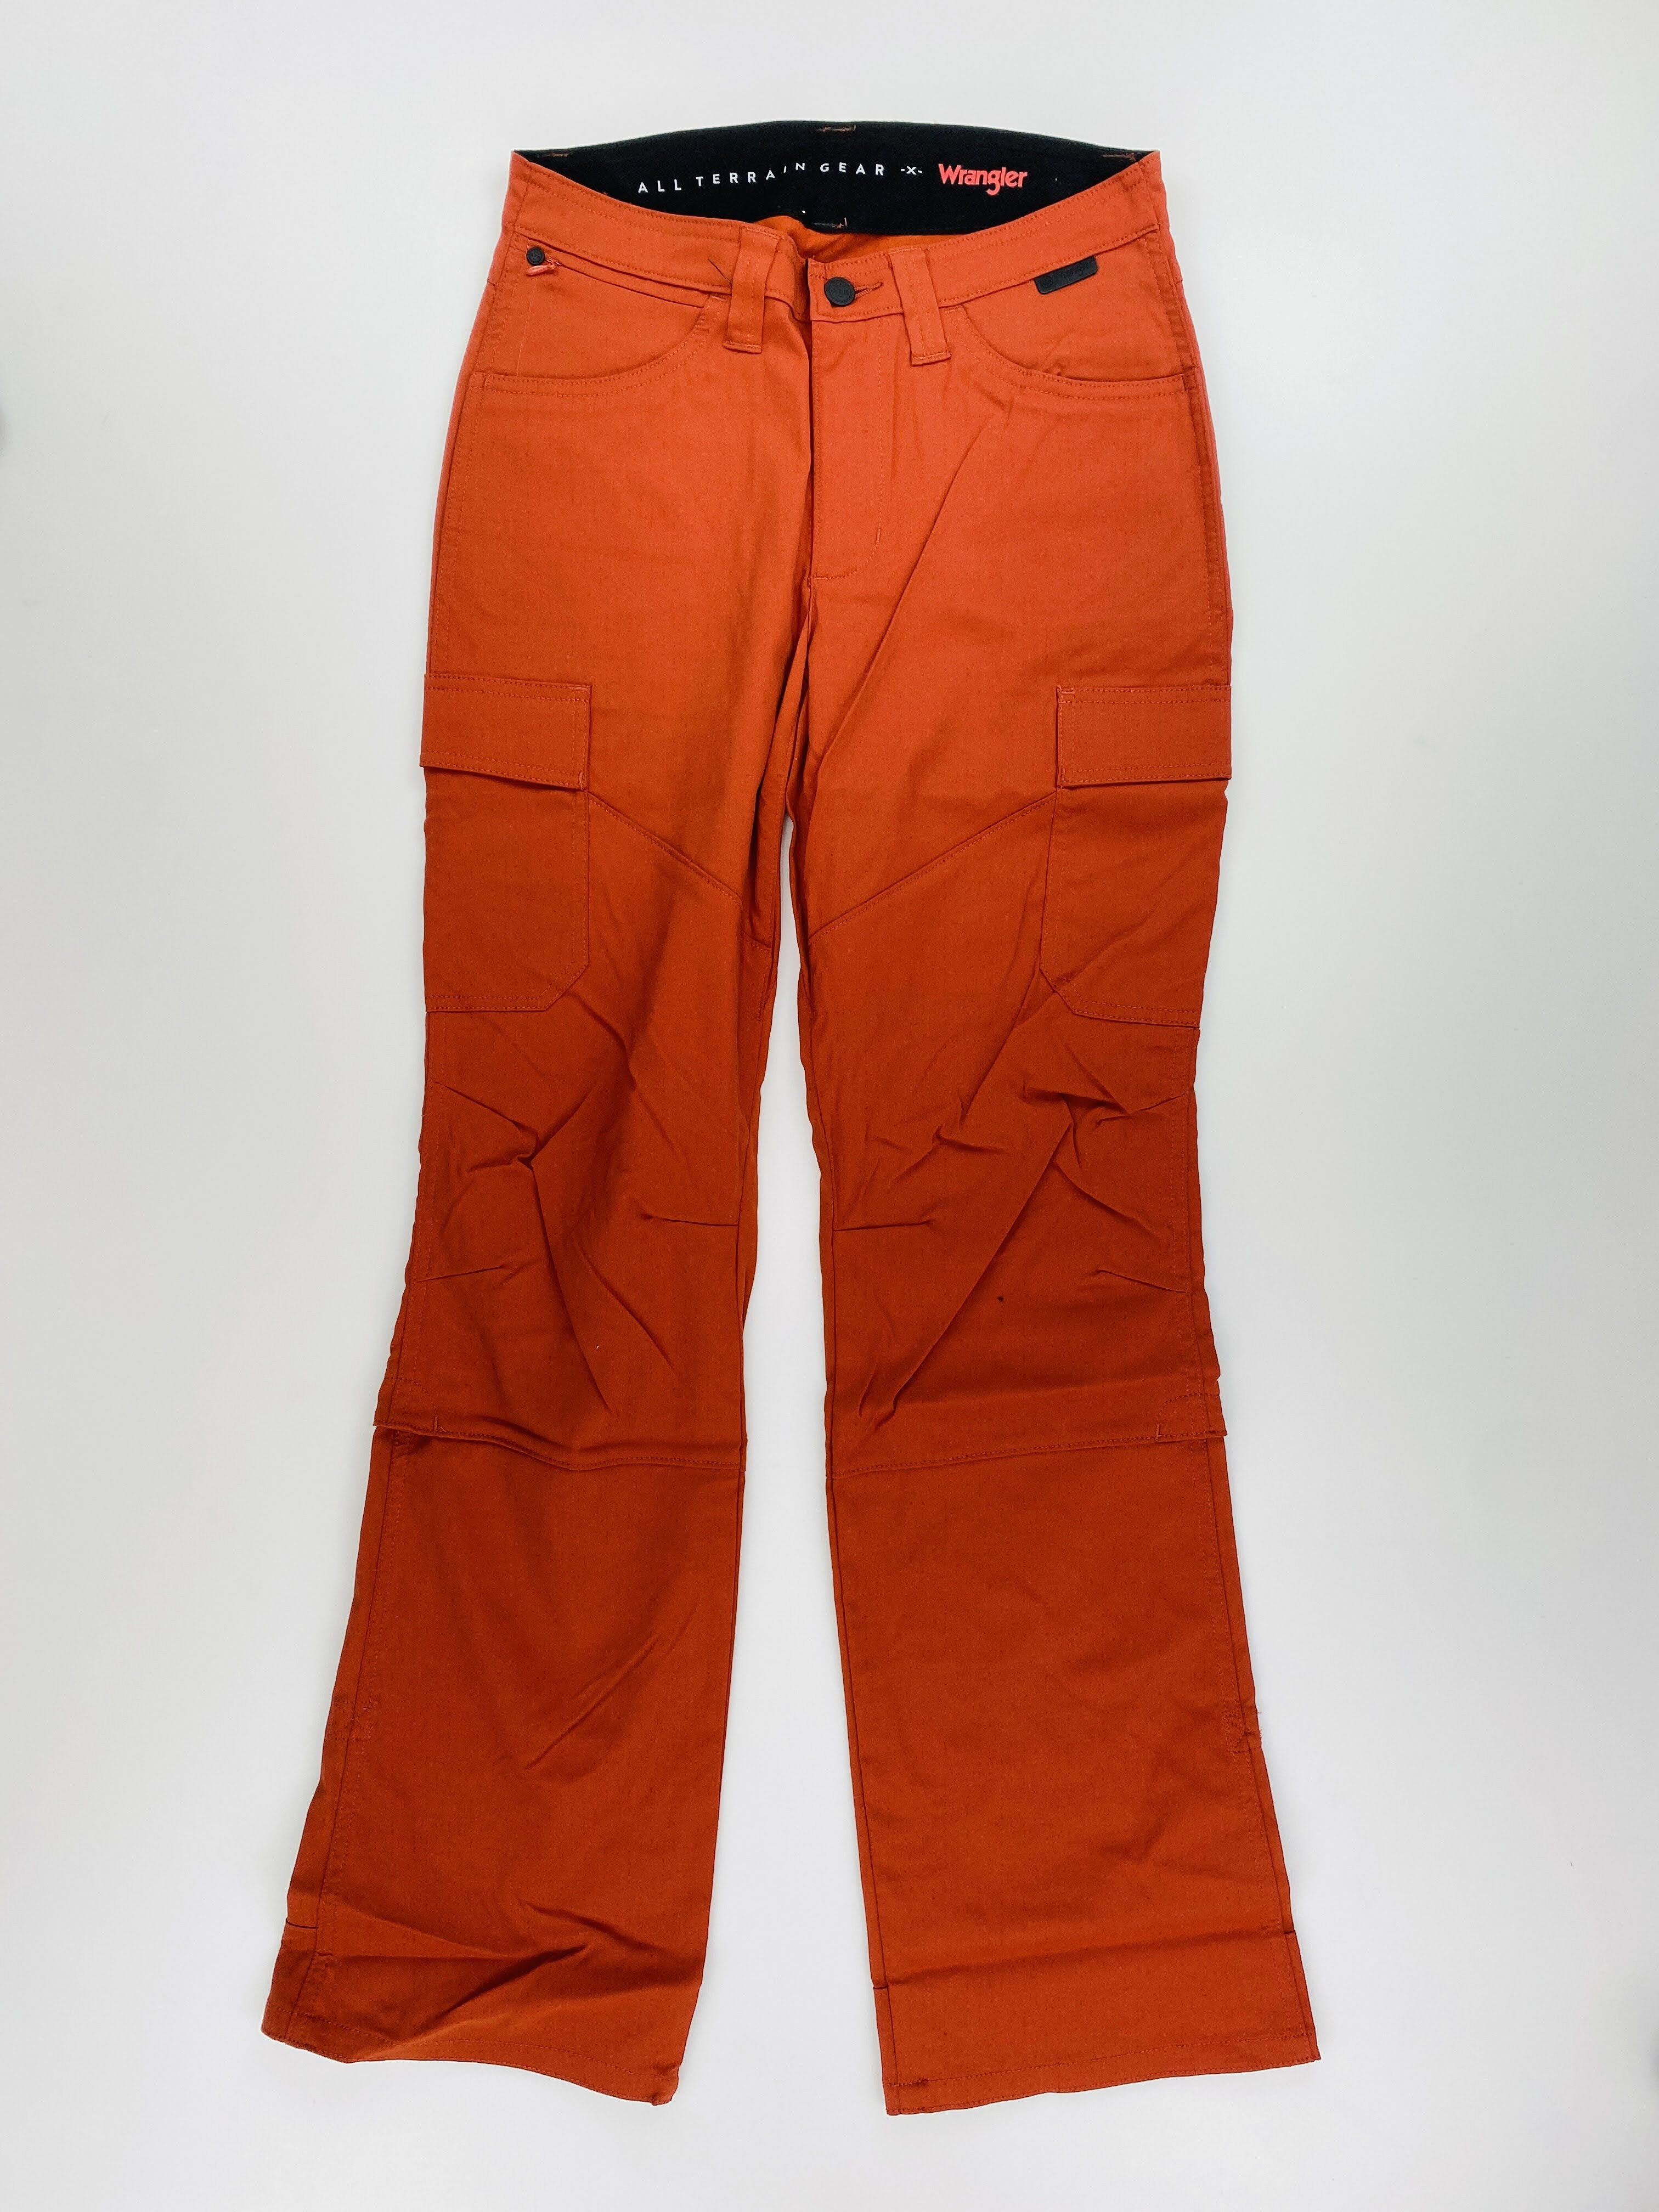 Wrangler Cargo Bootcut Conver - Second Hand Walking trousers - Women's - Red - US 28 | Hardloop